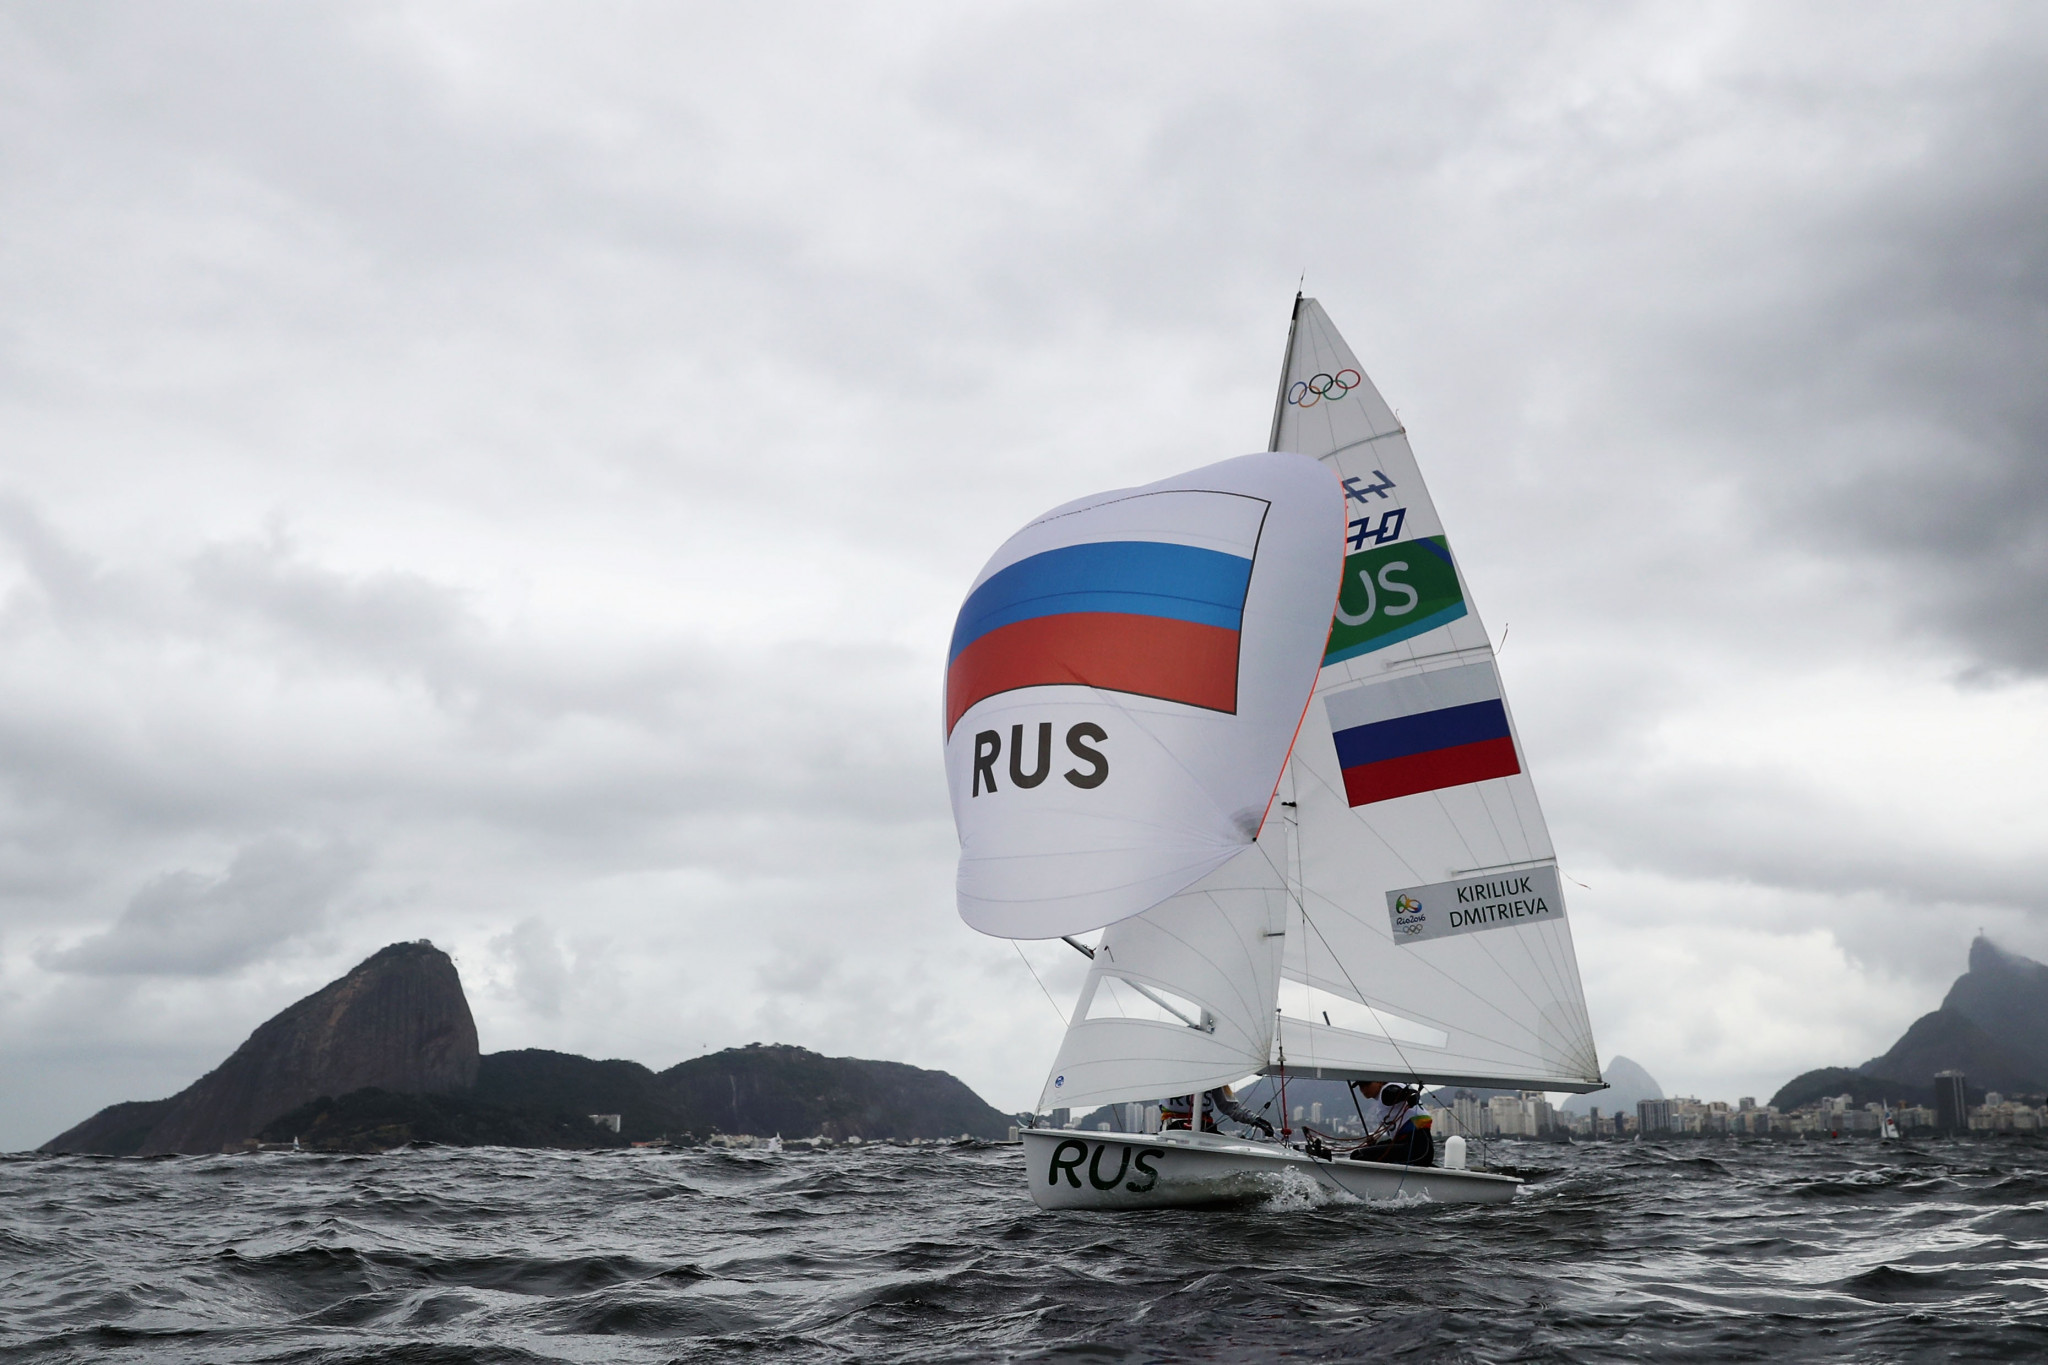 Eight Russian and Belarusian officials lose appeal to lift World Sailing ban